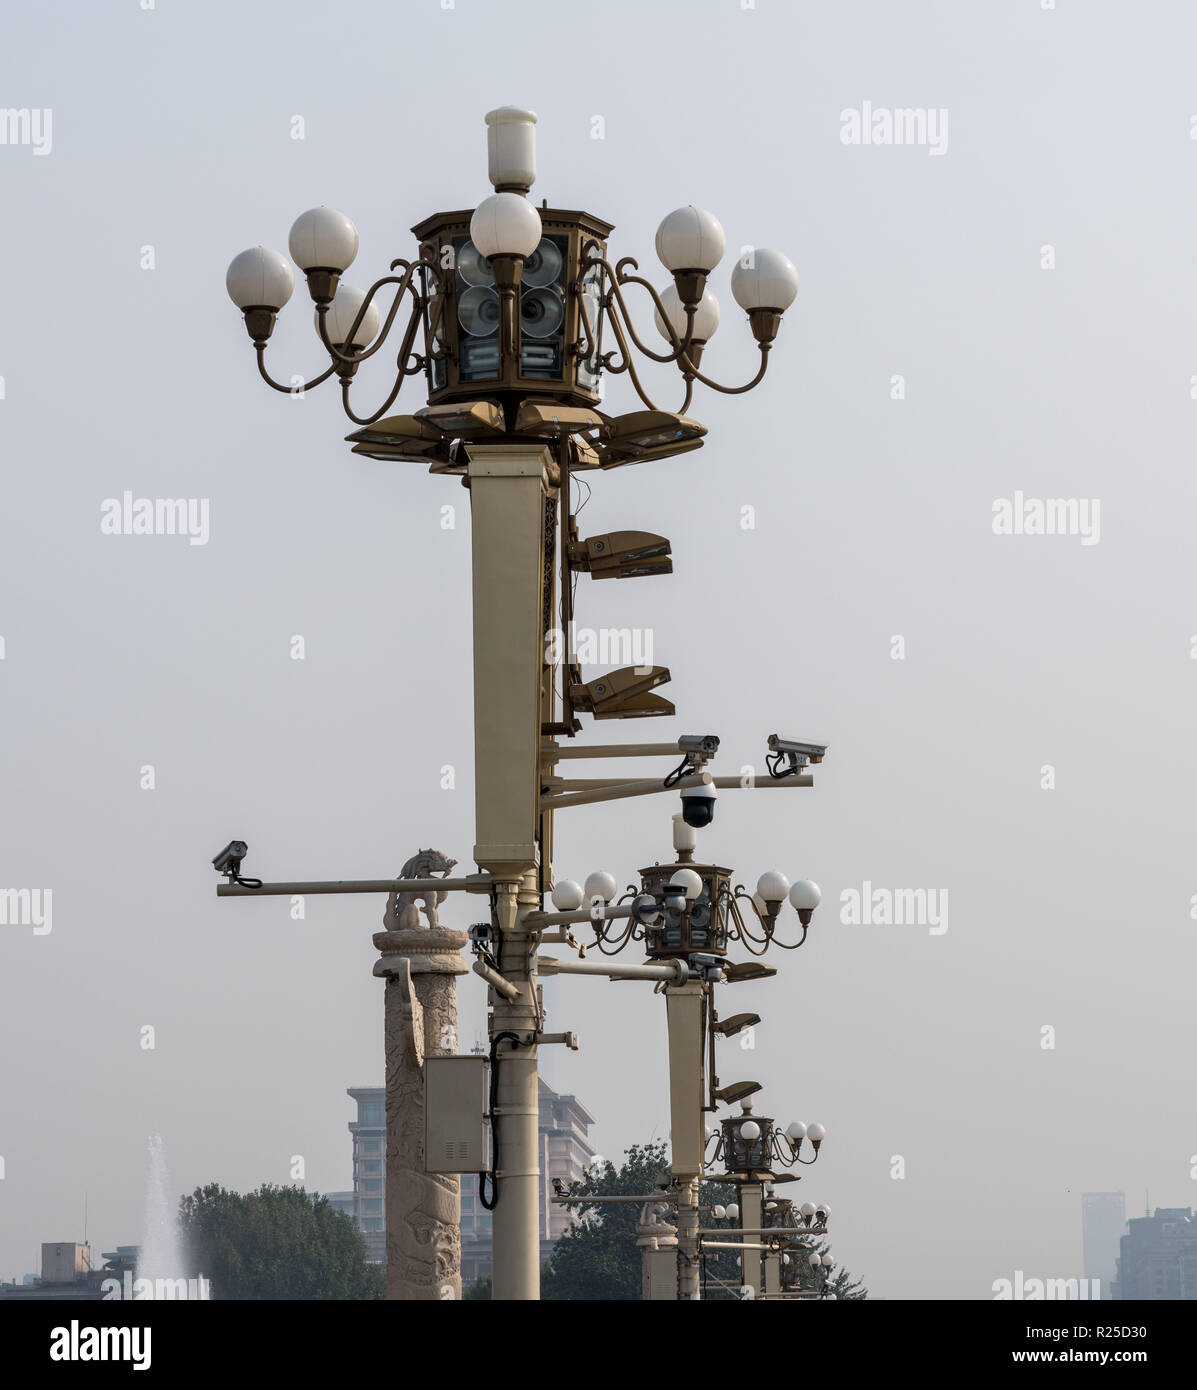 Security cameras and lights in Tiananmen Square Stock Photo